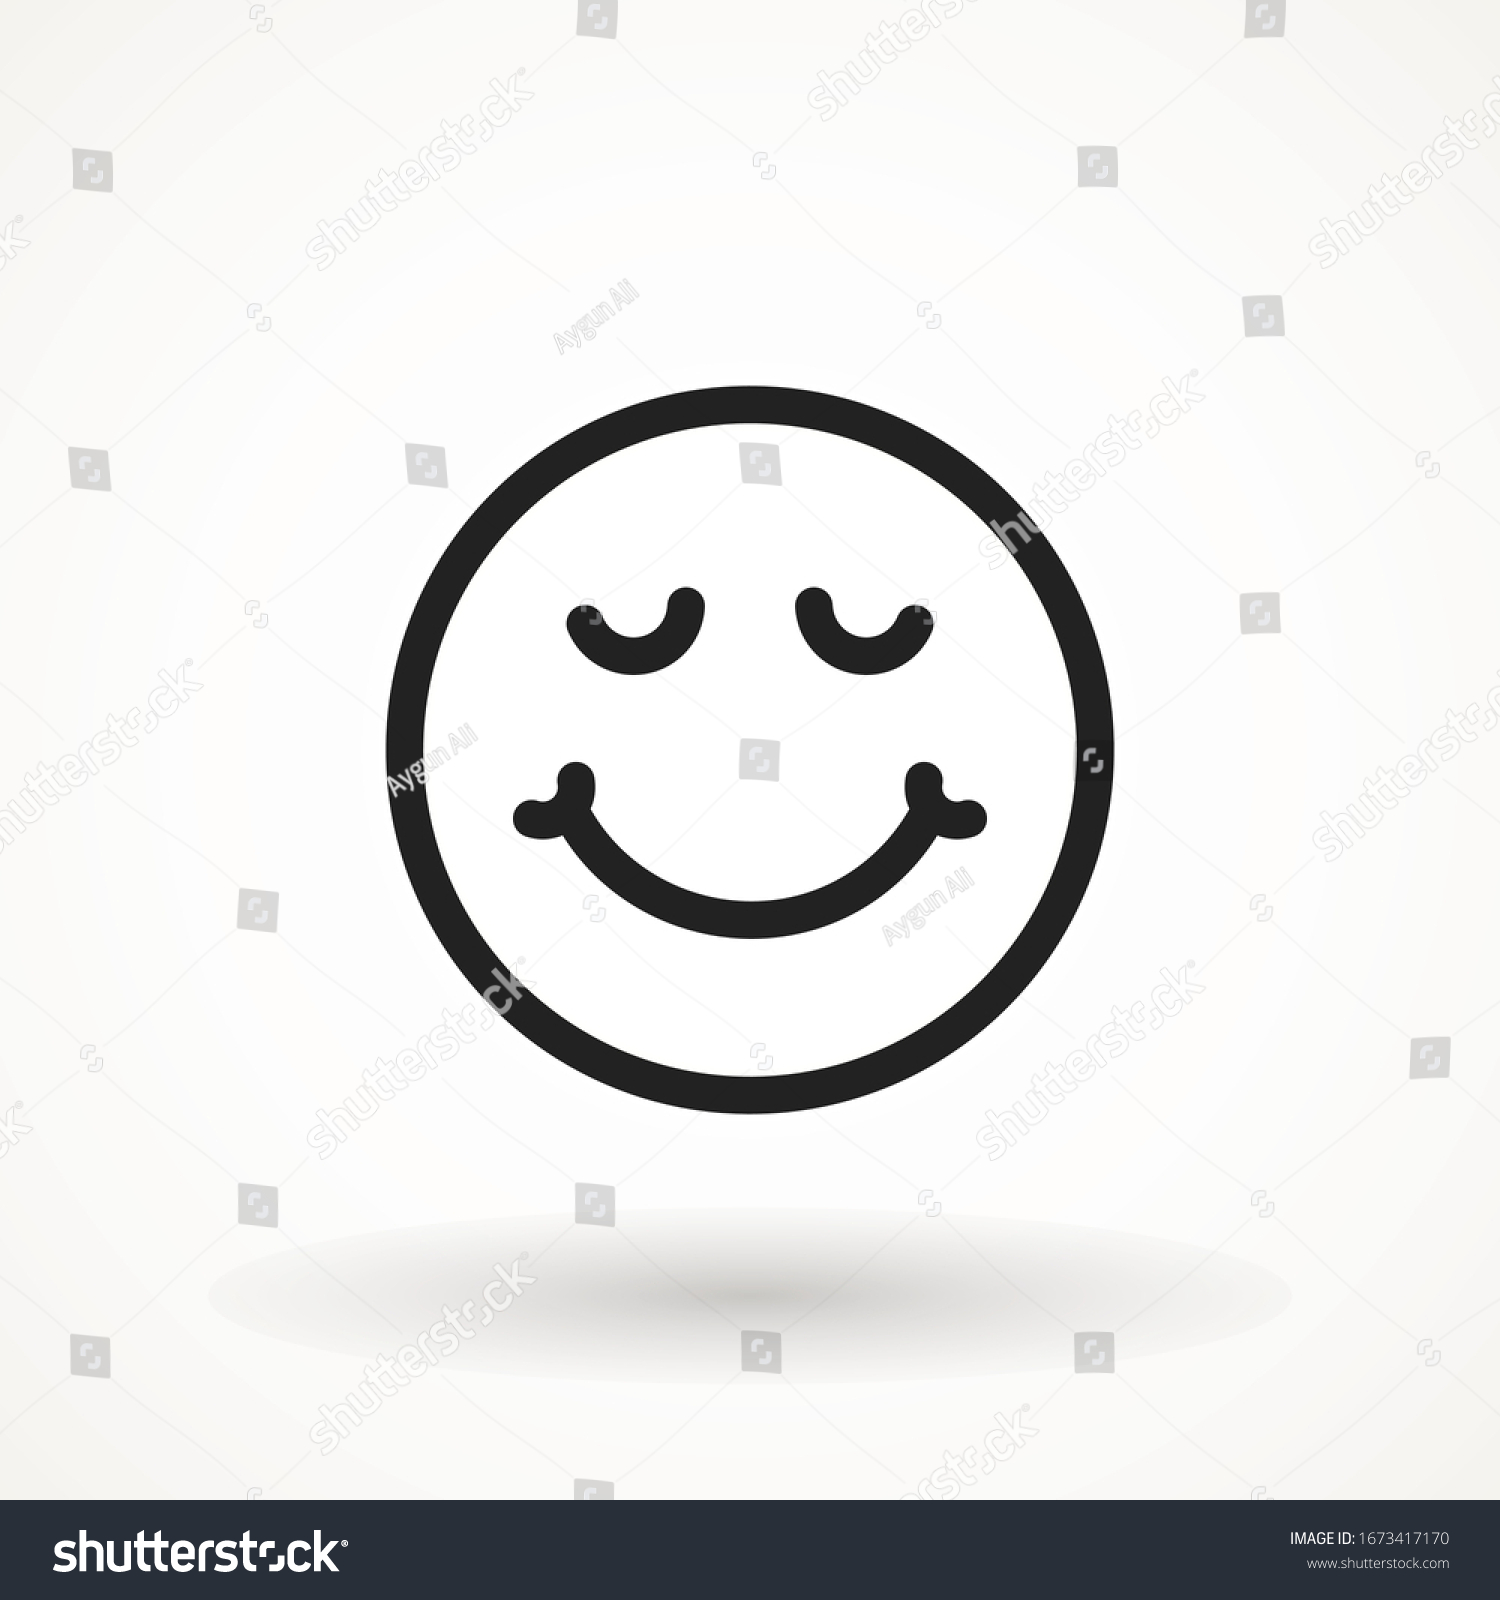 Yummy smile emoticon icon lick mouth. Editable strok Tasty food eating emoji face. Delicious cartoon on white background. Smile face line design. Savory gourmet. Yummy vector icon #1673417170